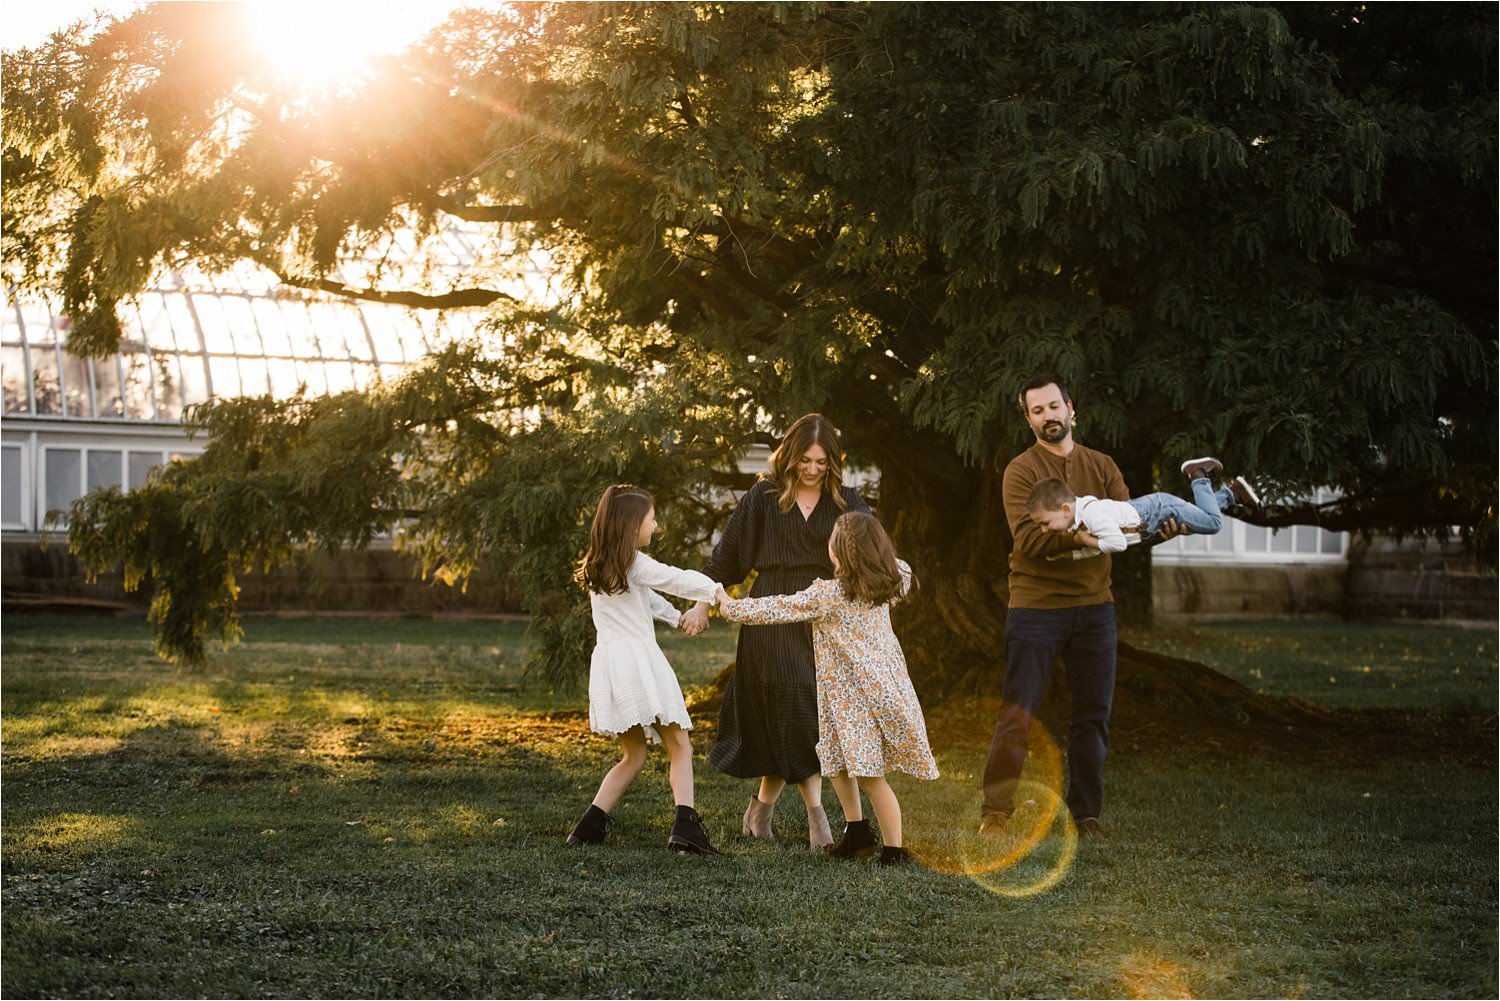 relaxed and fun golden hour family photography